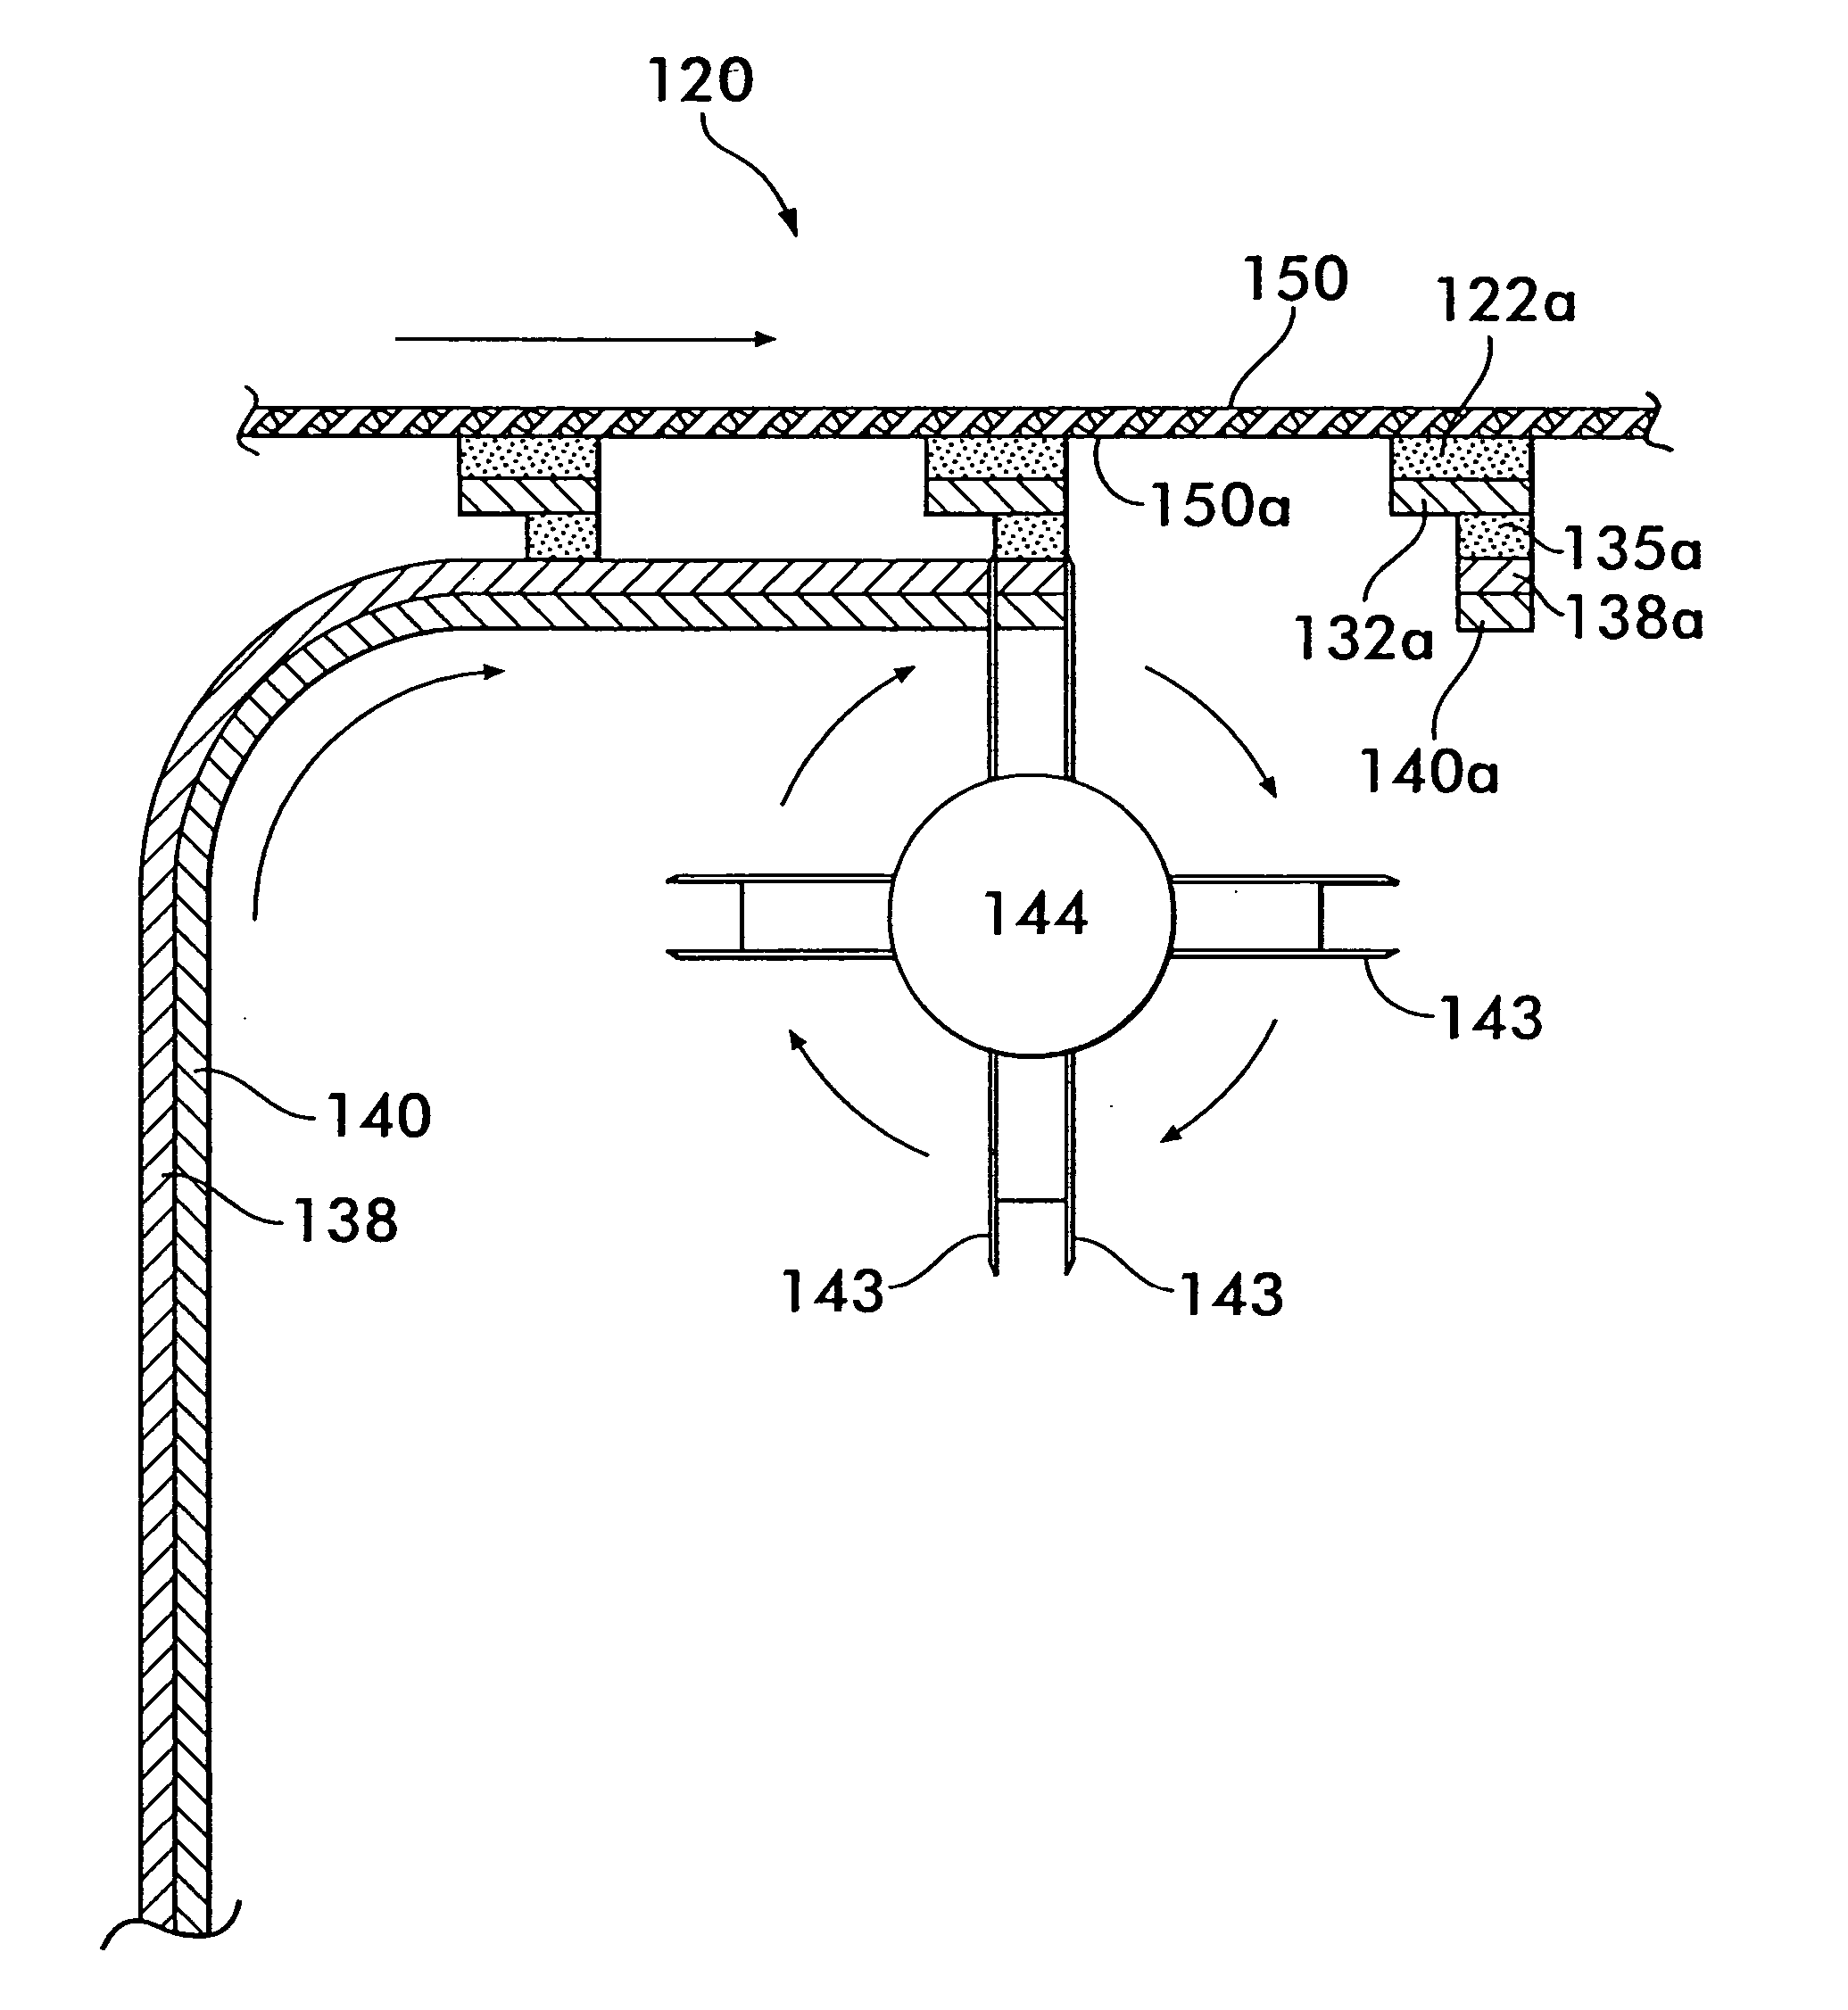 Method for aligning capacitor plates in a security tag and a capacitor formed thereby